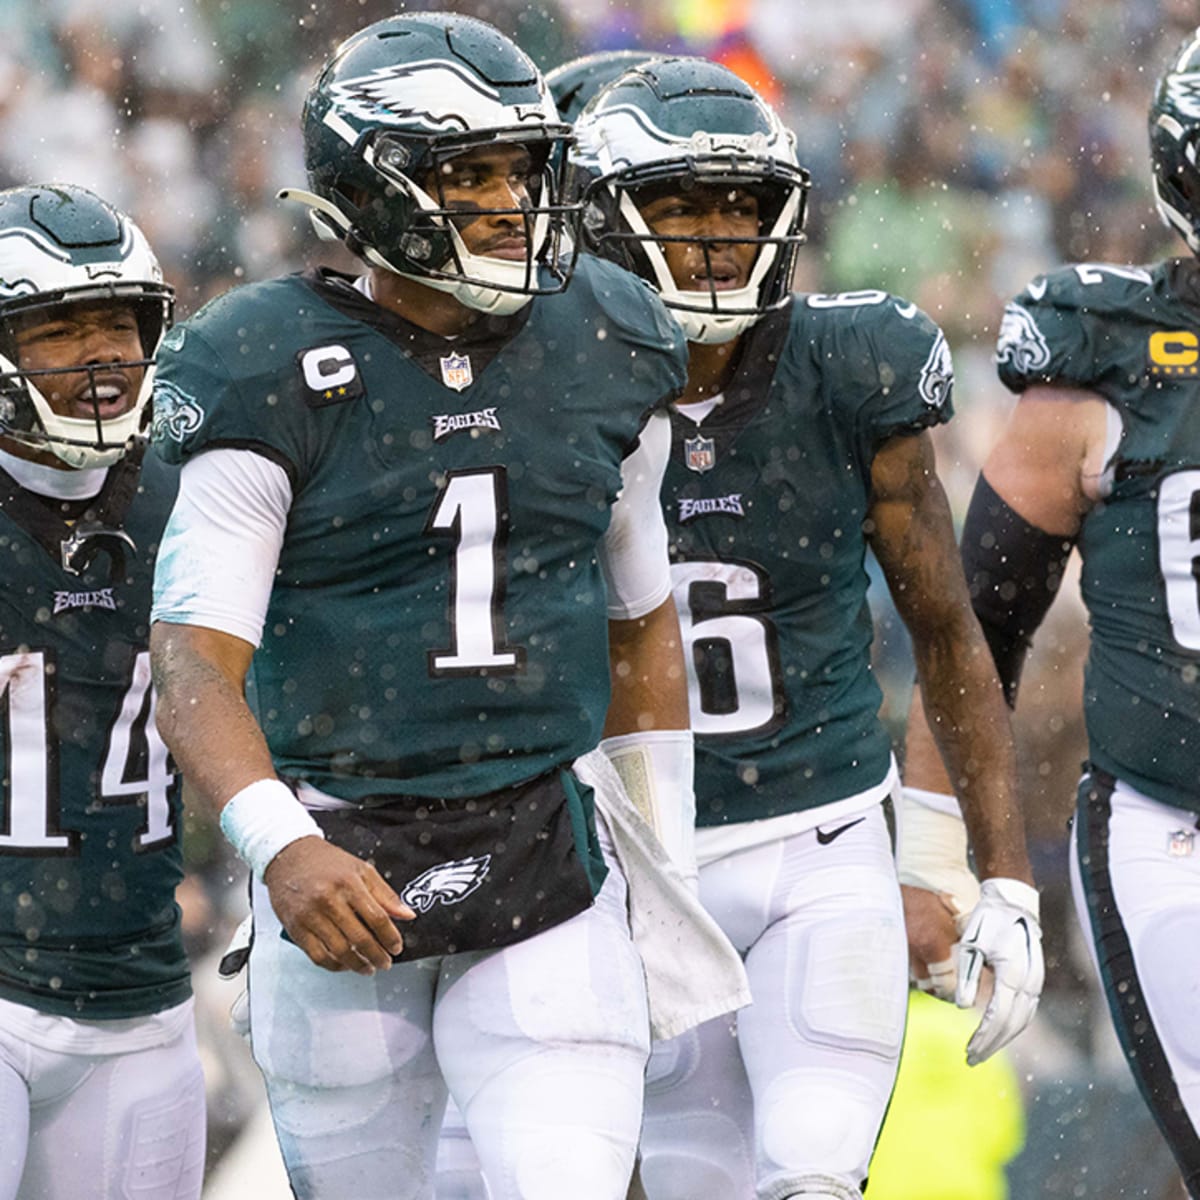 Eagles Kelly Green jerseys, explained: What to know about